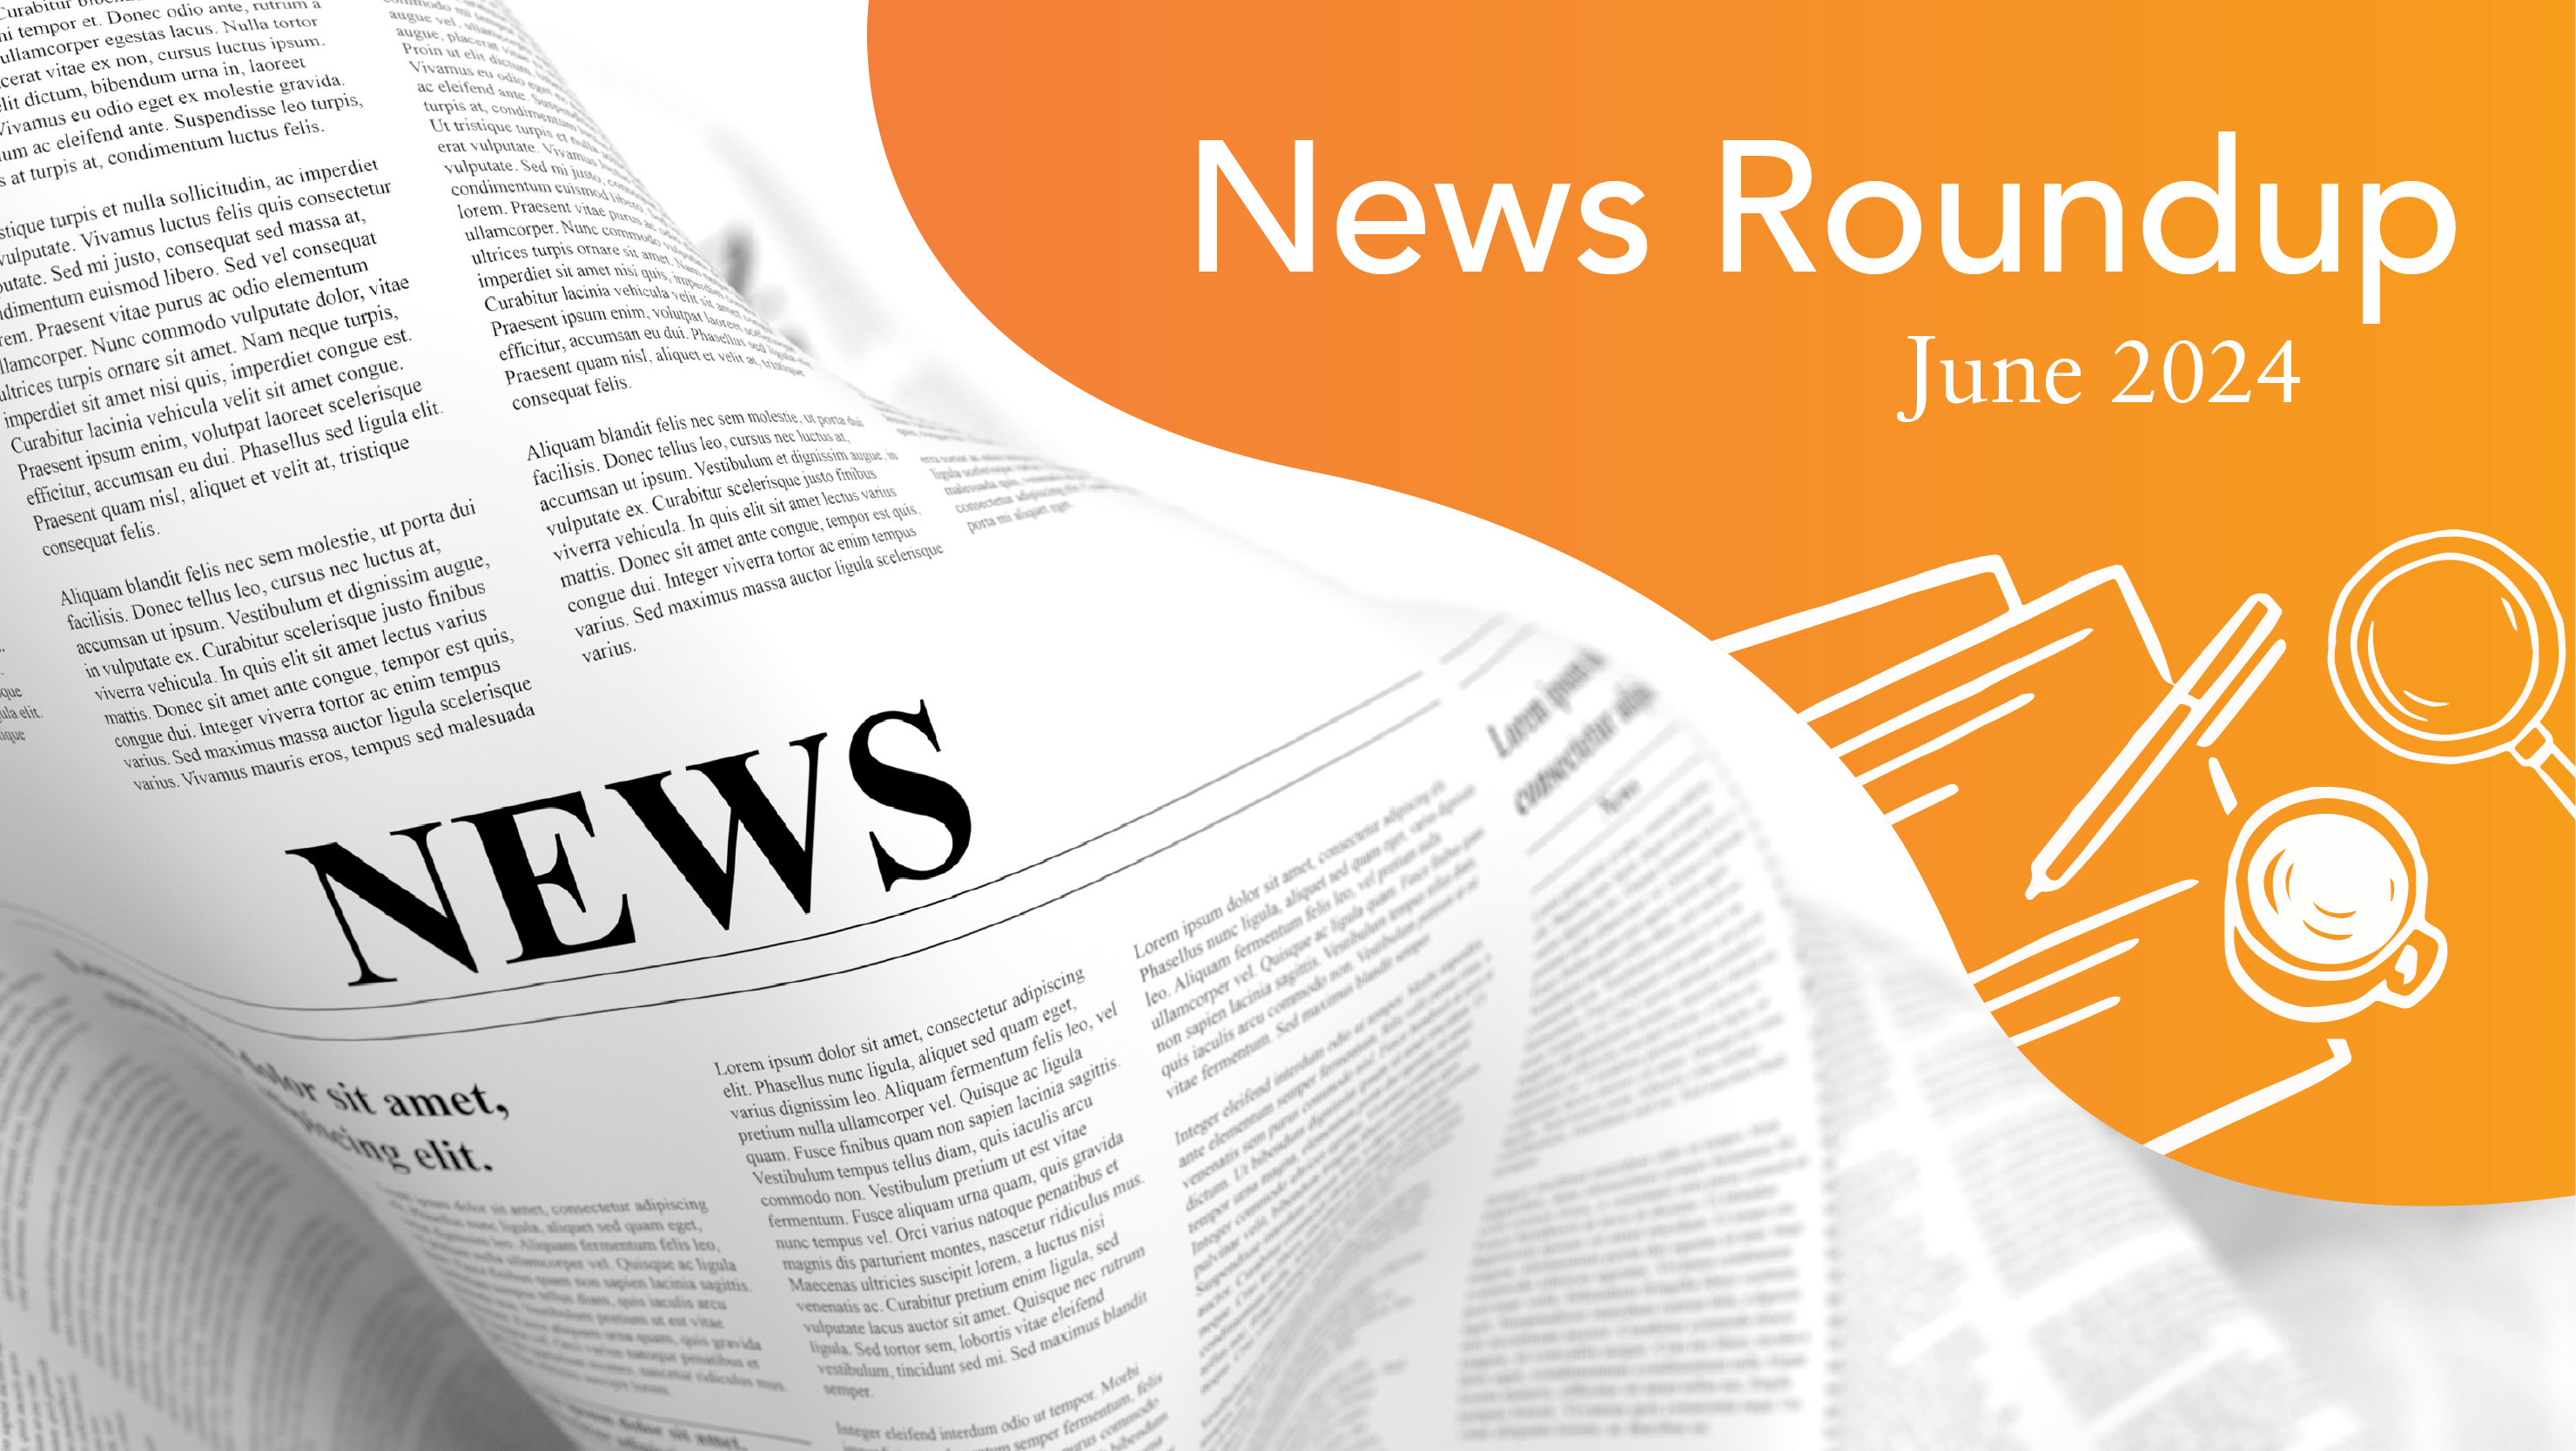 An illustrated image of a newspaper with an orange foreground with the copy "News Roundup June 2024"